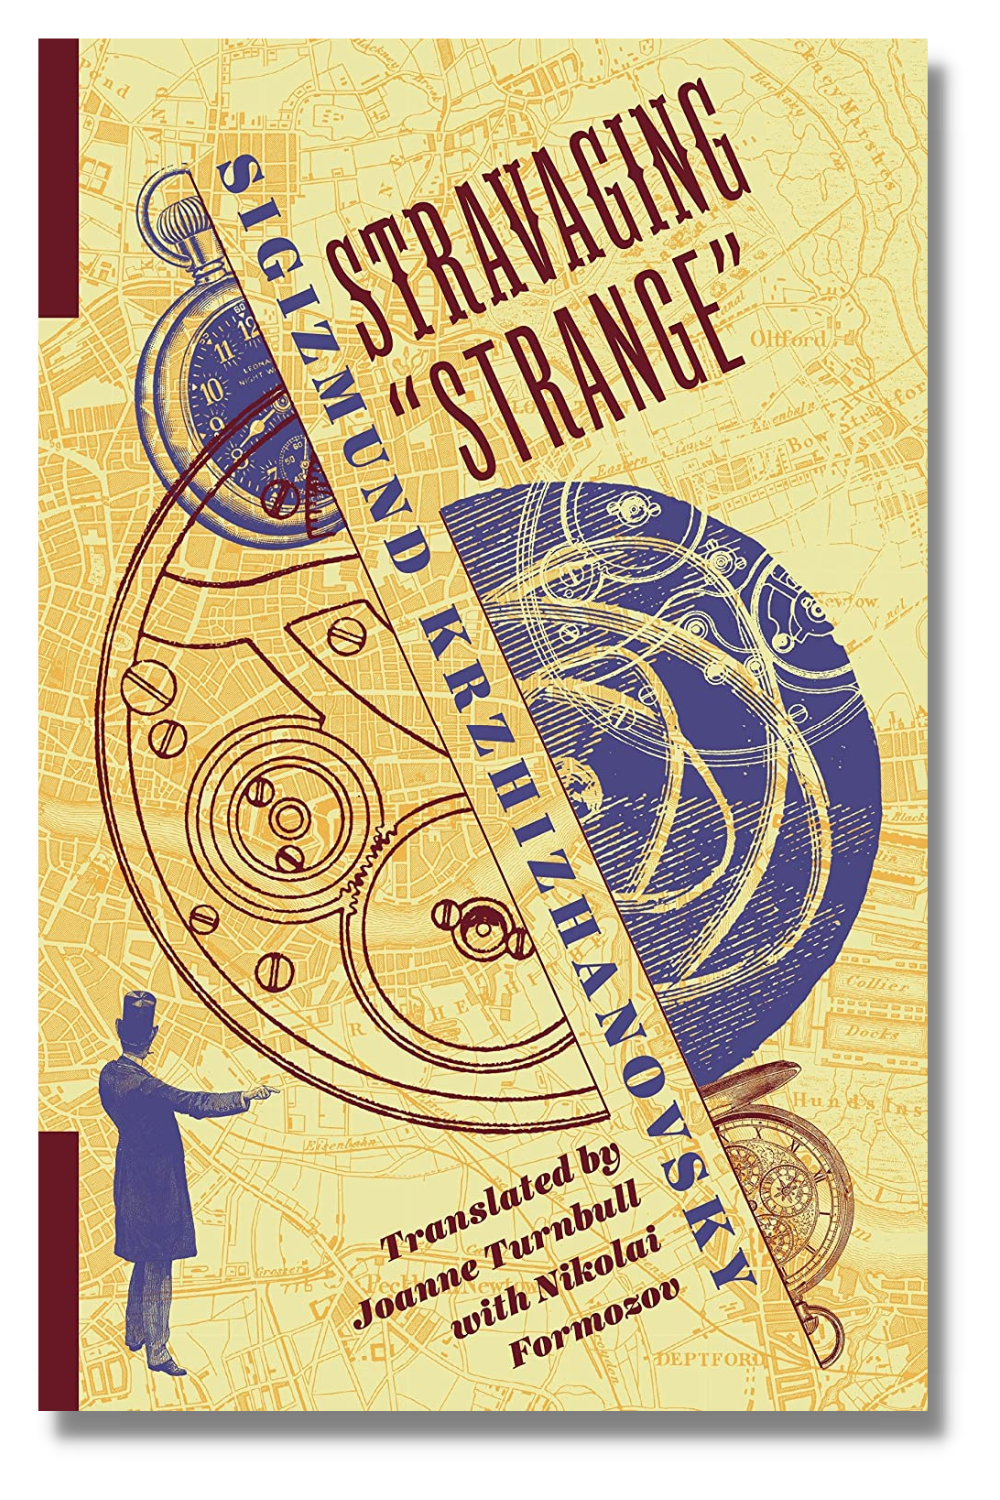 The cover of "Stravaging 'Strange'"